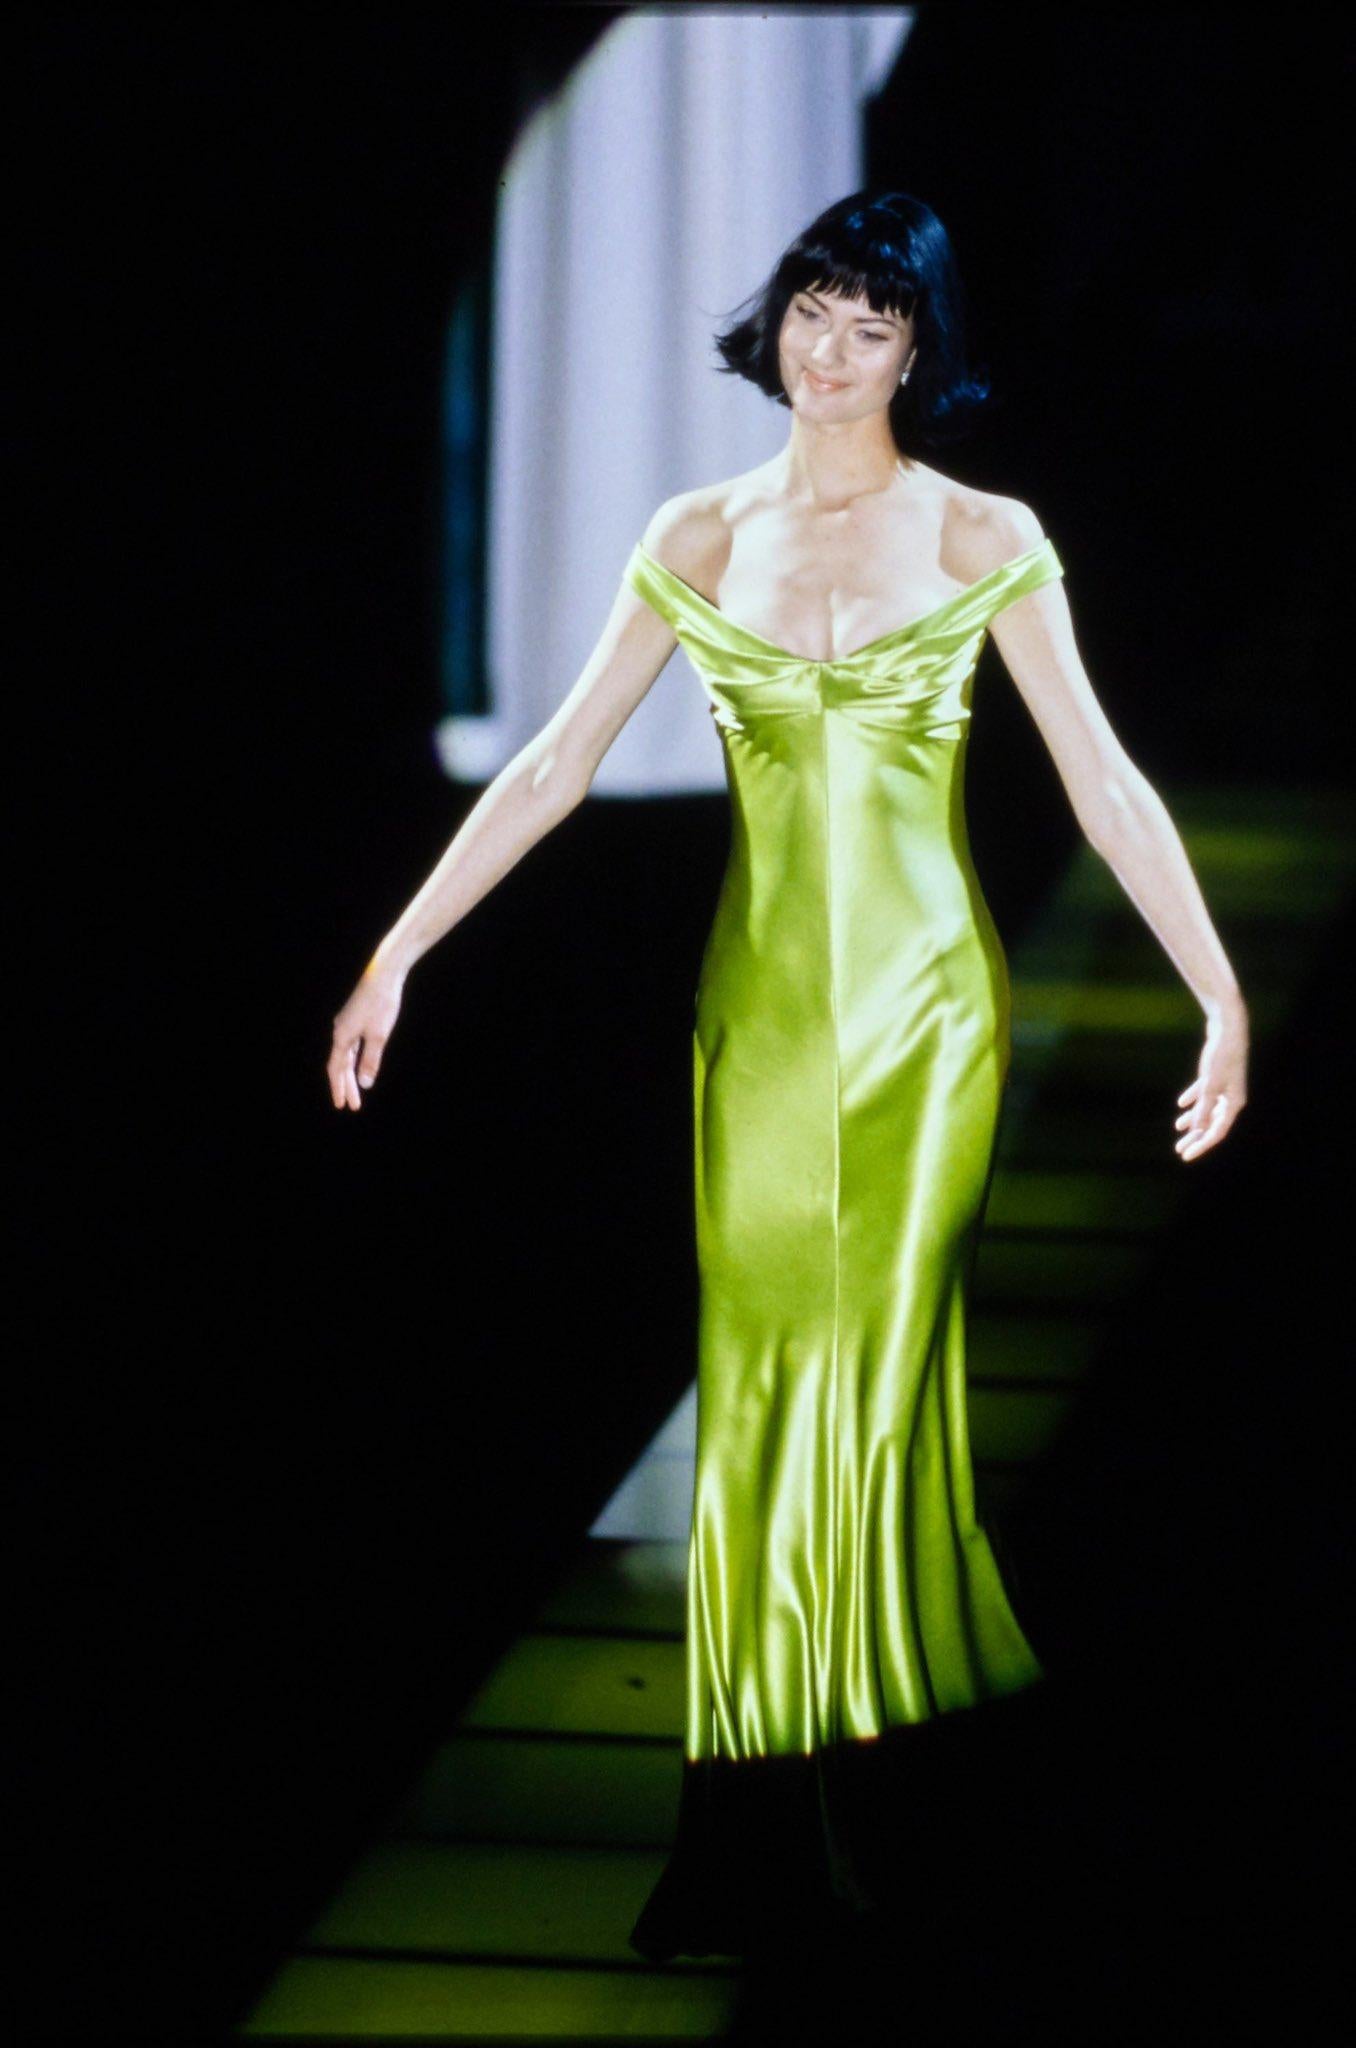 A well documented and highly coveted Gianni Versace chartreuse green off-shoulder hourglass gown dating back to his iconic 1995 fall-winter collection. Versace’s creations were enjoyed by the super wealthy but his impact was felt across a wider